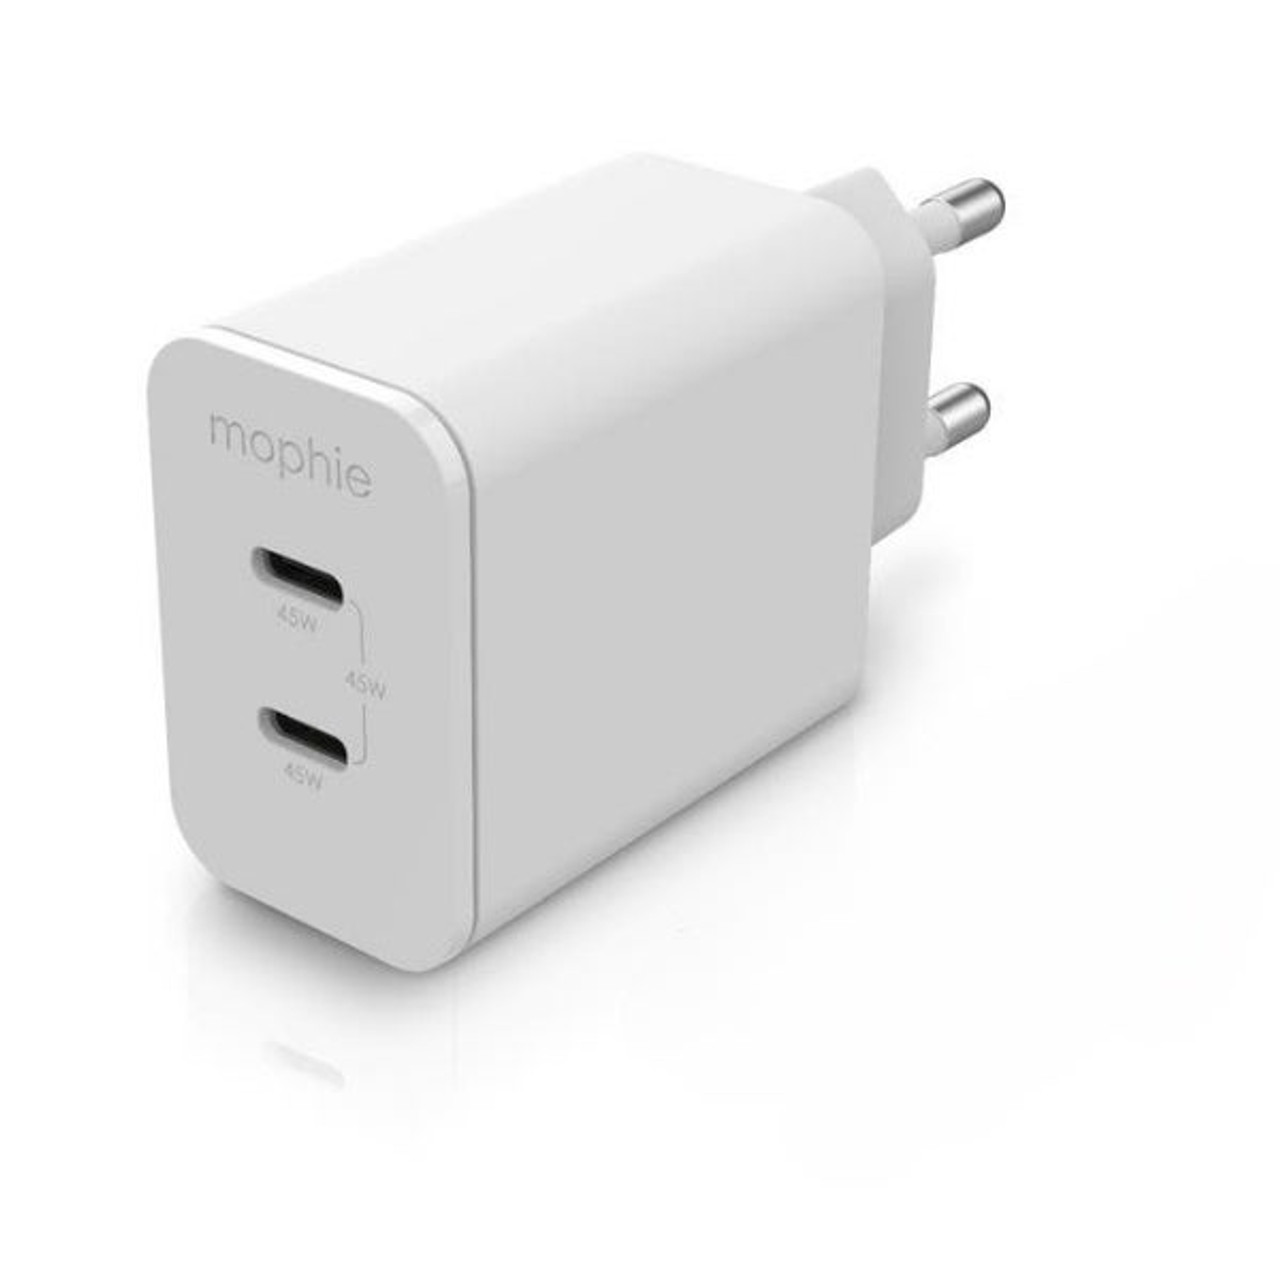 Shop Charger and Adapters